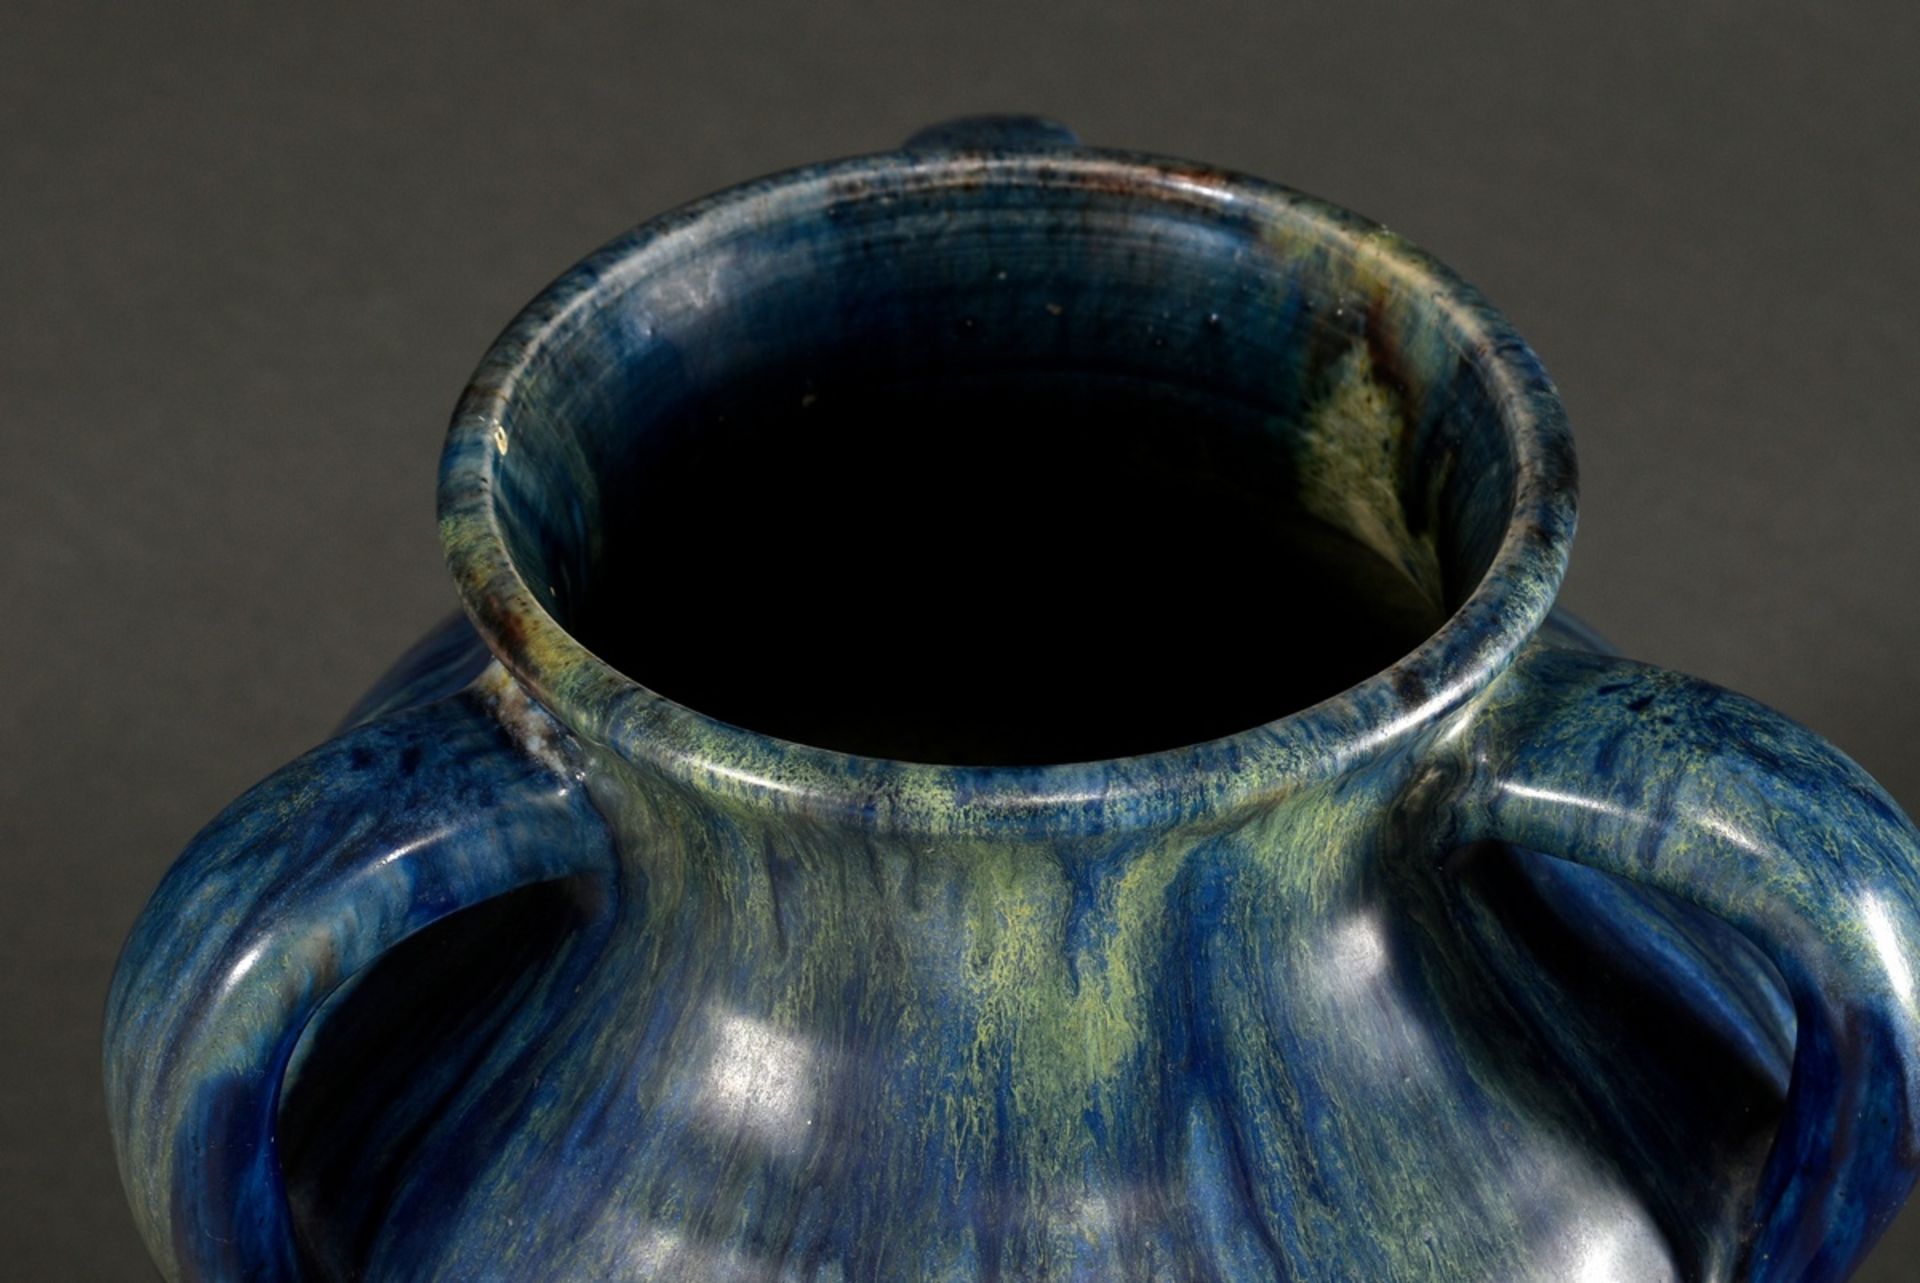 Large baluster vase with 3 handles and bulbous body, ceramic with blue gradient glaze, 1913-1929, b - Image 3 of 6